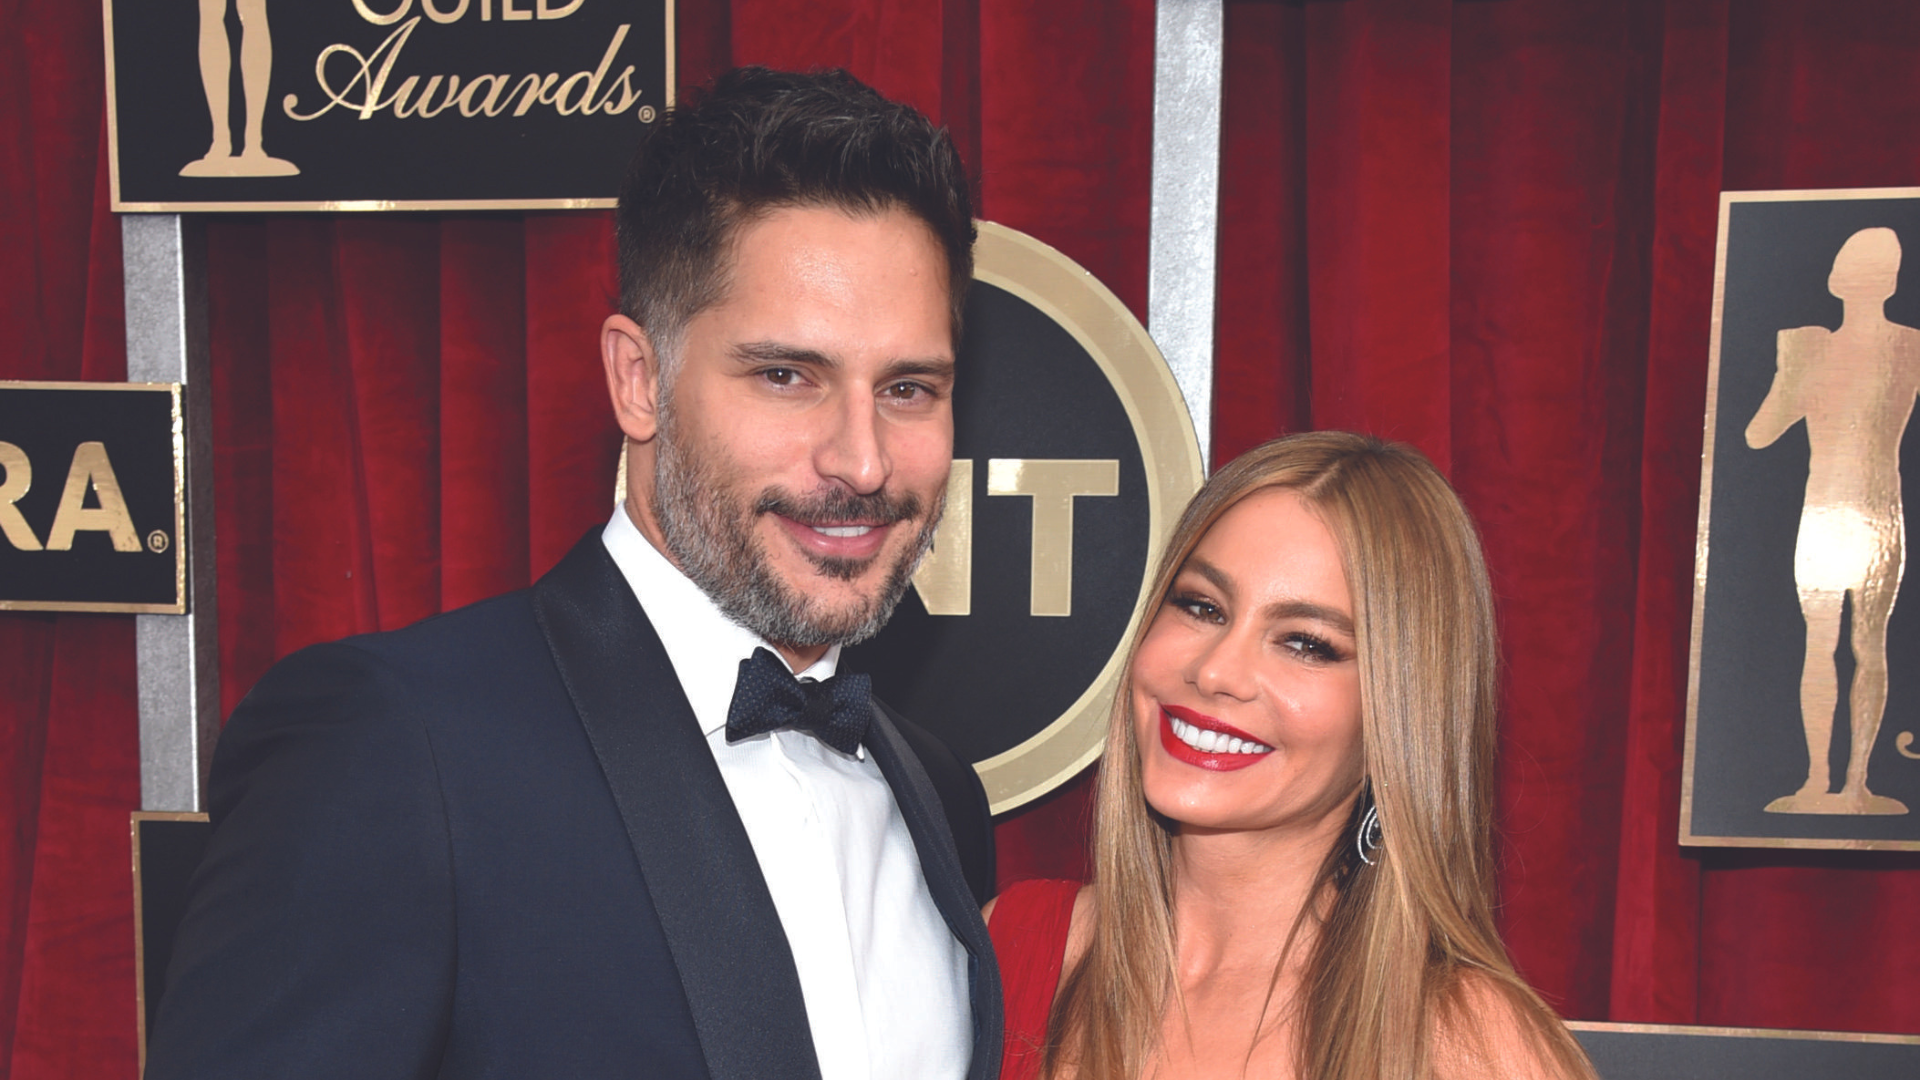 Manganiello and his TV superstar wife Sofia Vergara are one of the most glamorous couples in Hollywood. Photo Credit/ John Shearer/AP.